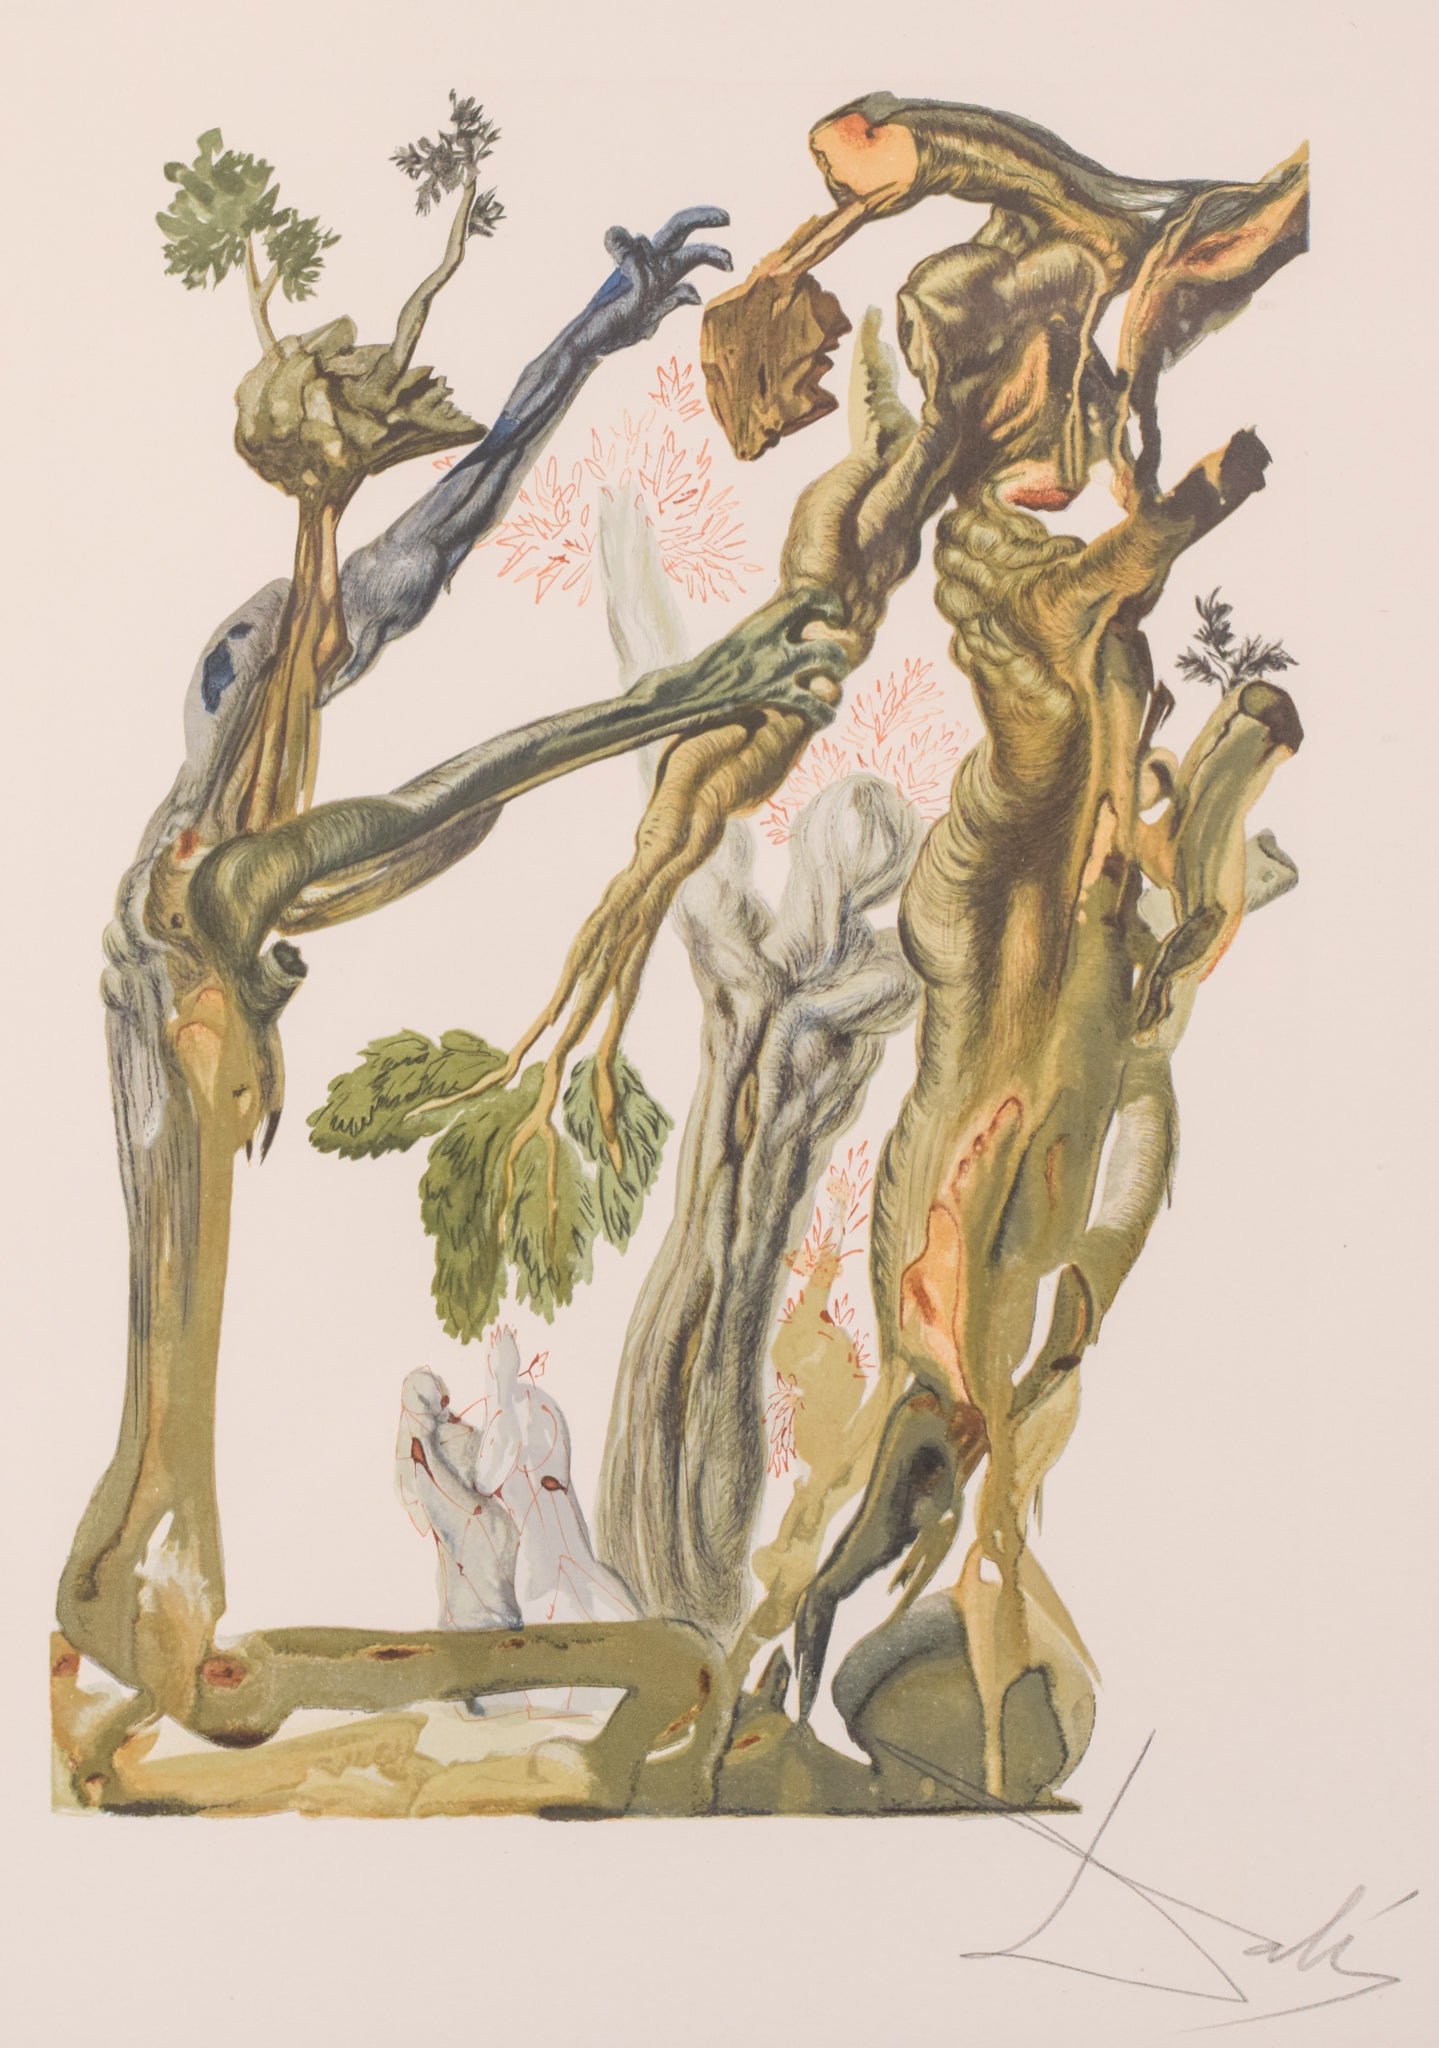 'The Divine Comedy' Lithograph by Salvador Dalí